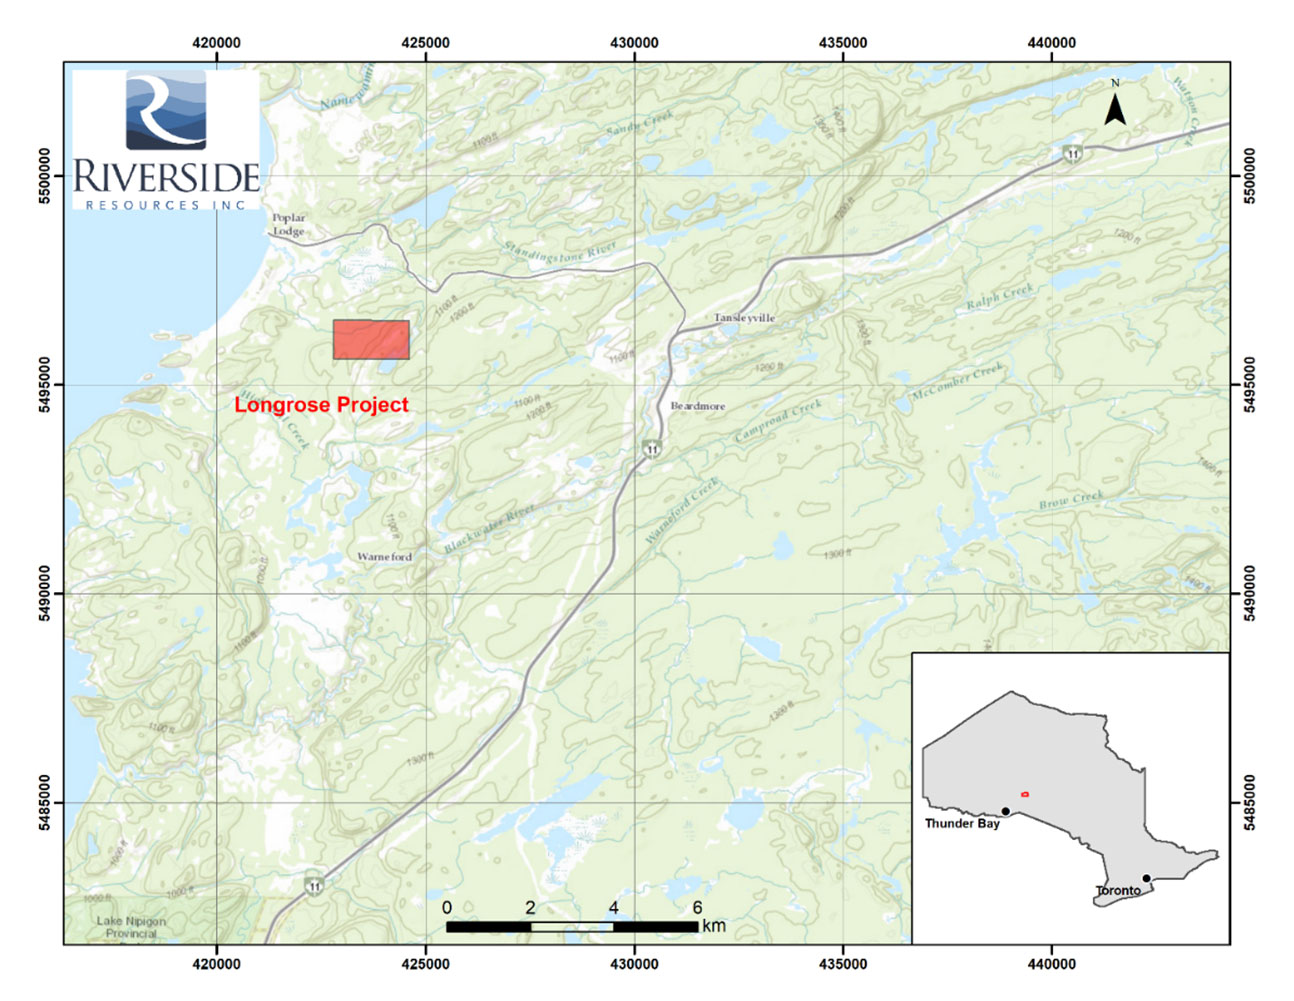 The Longrose Project is located 7 km west of Beardmore Ontario and can be accessed by 2-wheel drive vehicle off Highway 11